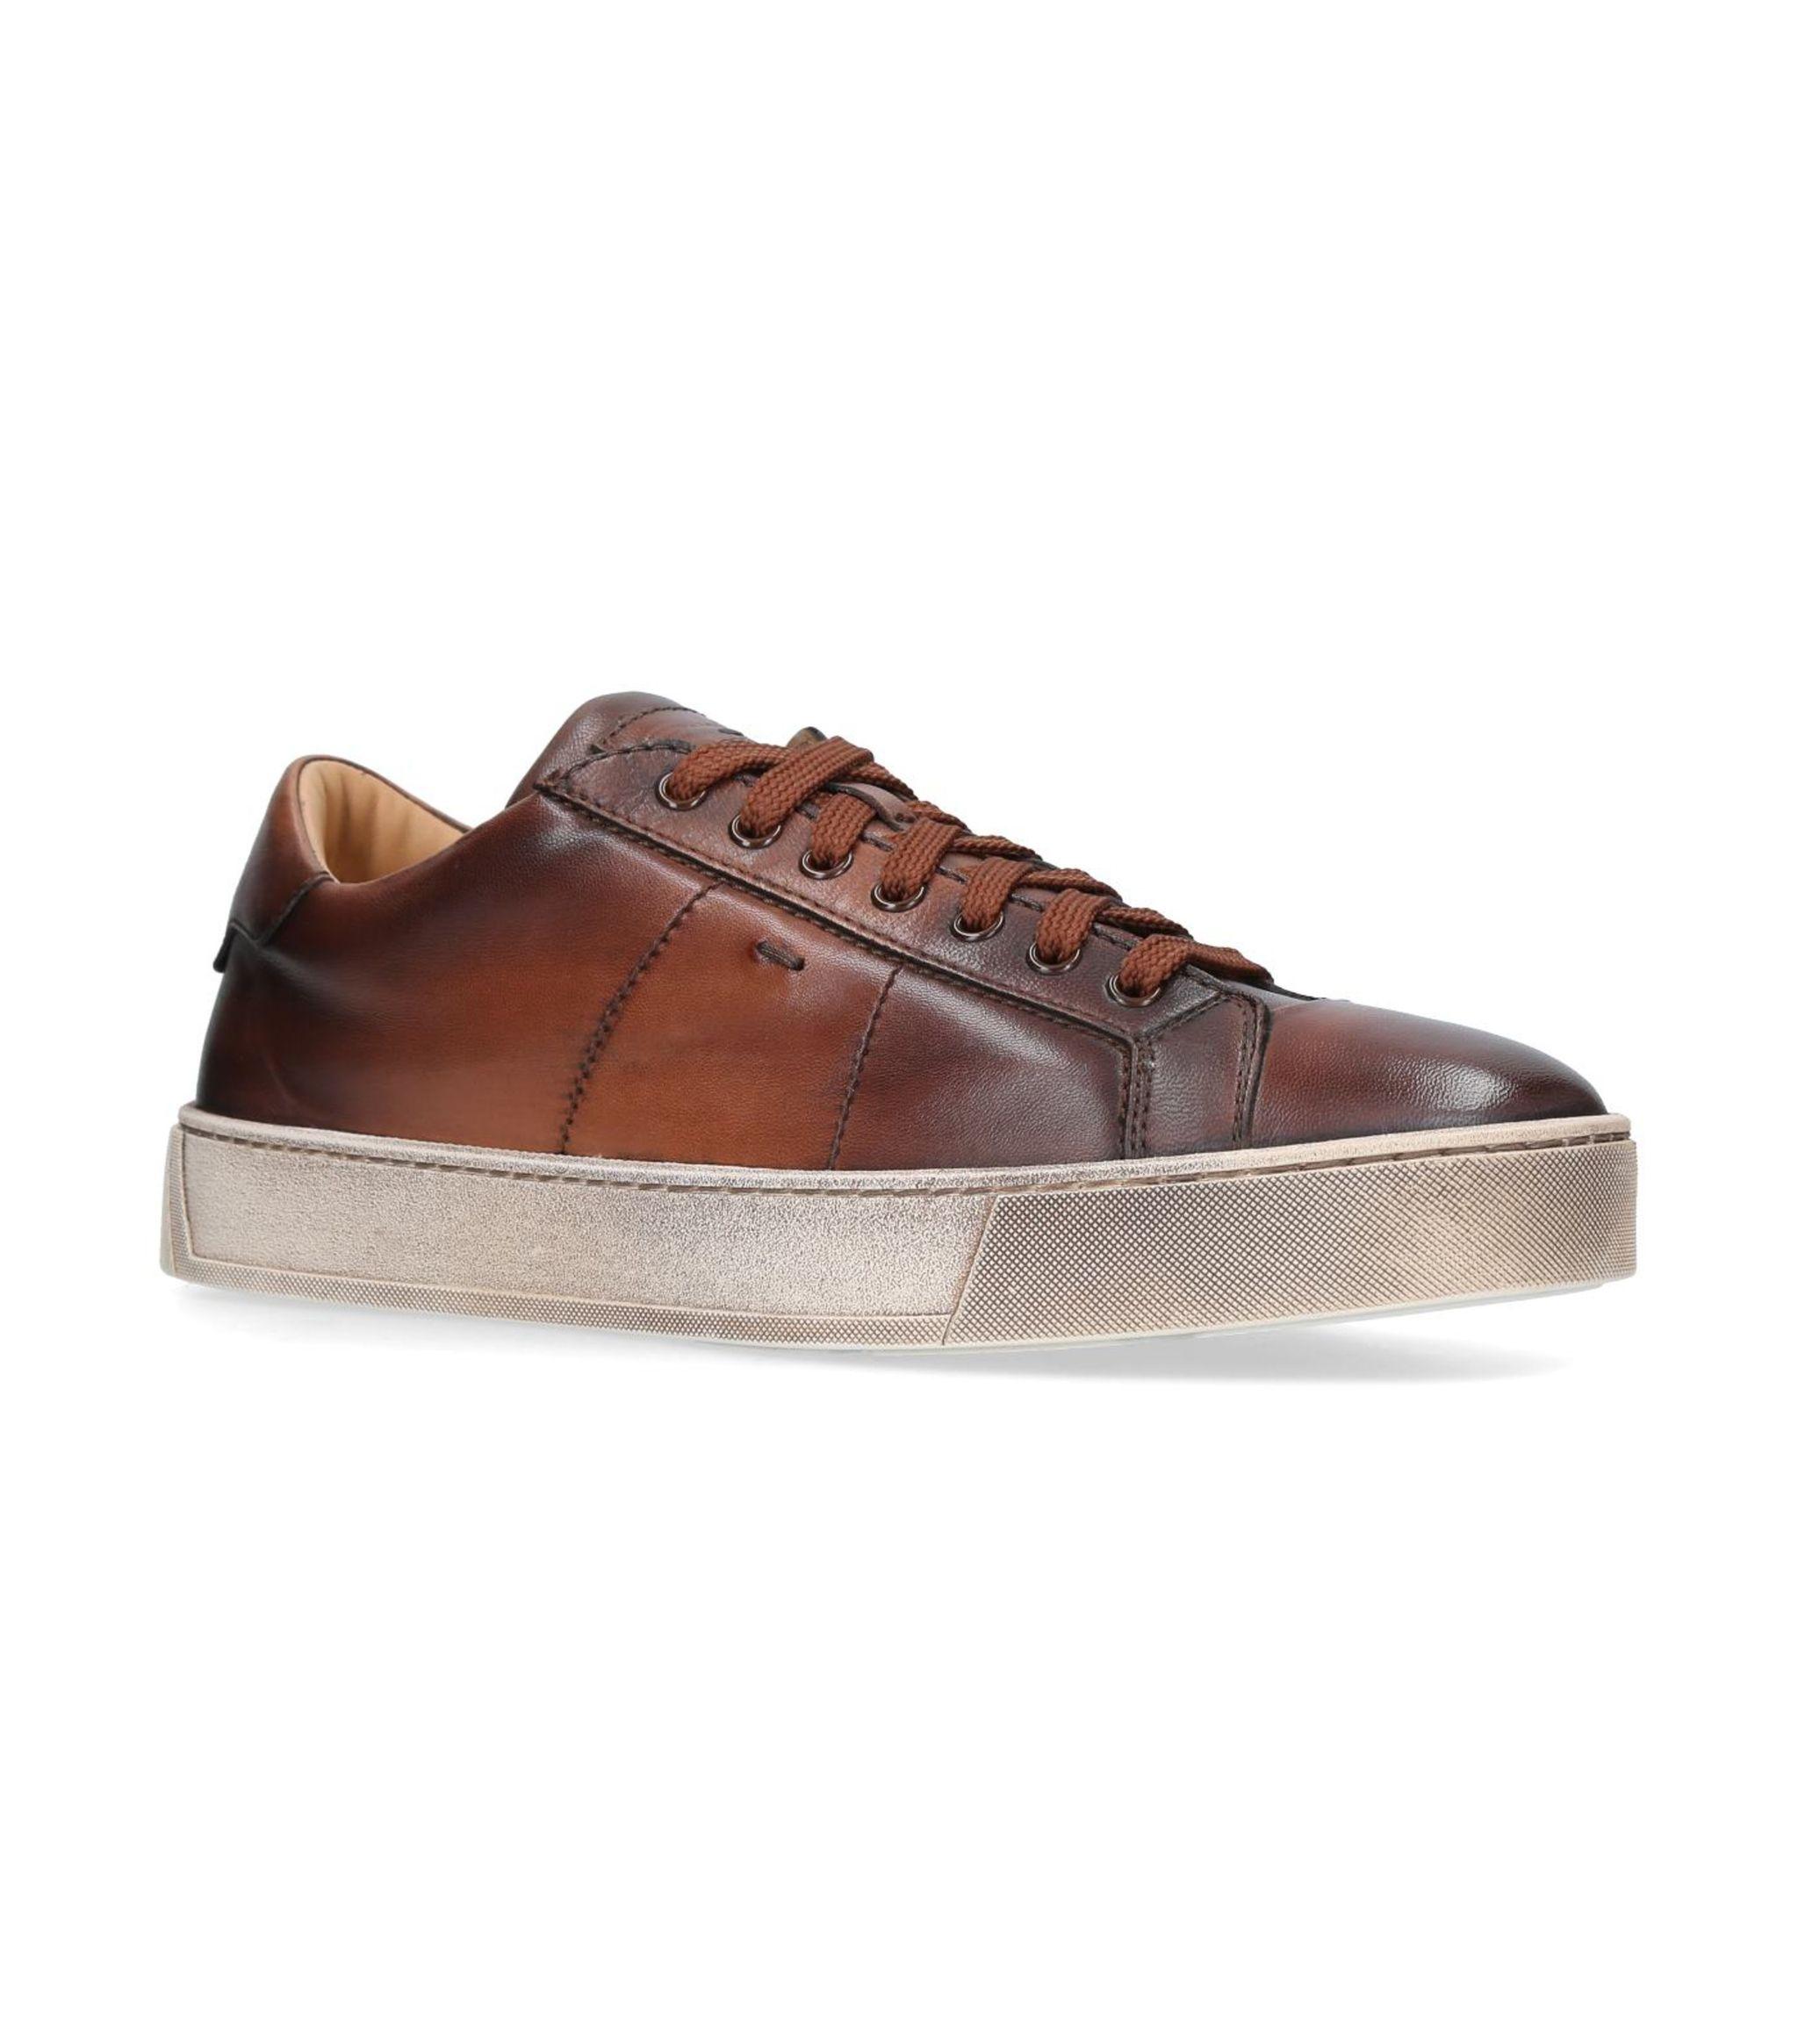 Santoni Gloria Soft Leather Sneakers in Brown for Men - Save 50% - Lyst